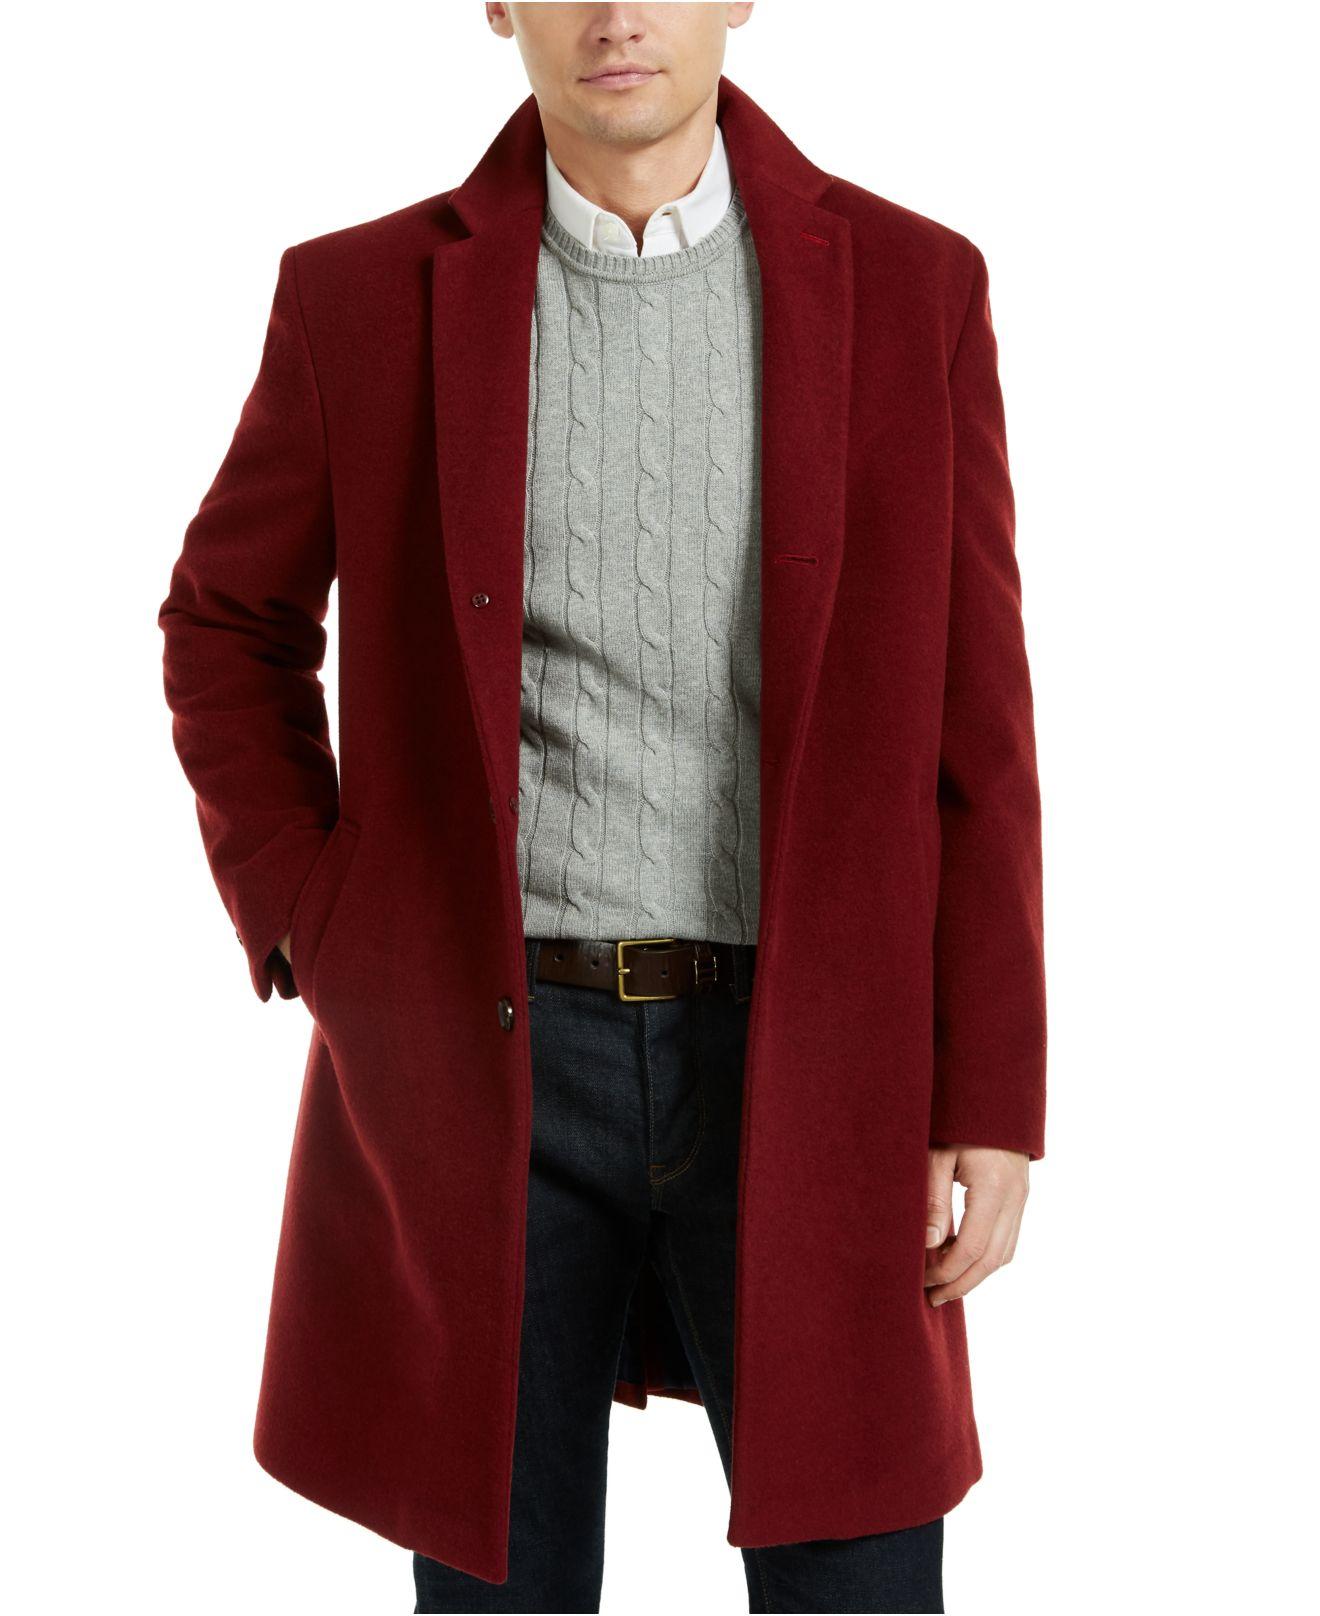 Tommy Hilfiger Addison Wool-blend Trim Fit Overcoat in Red for Men - Lyst